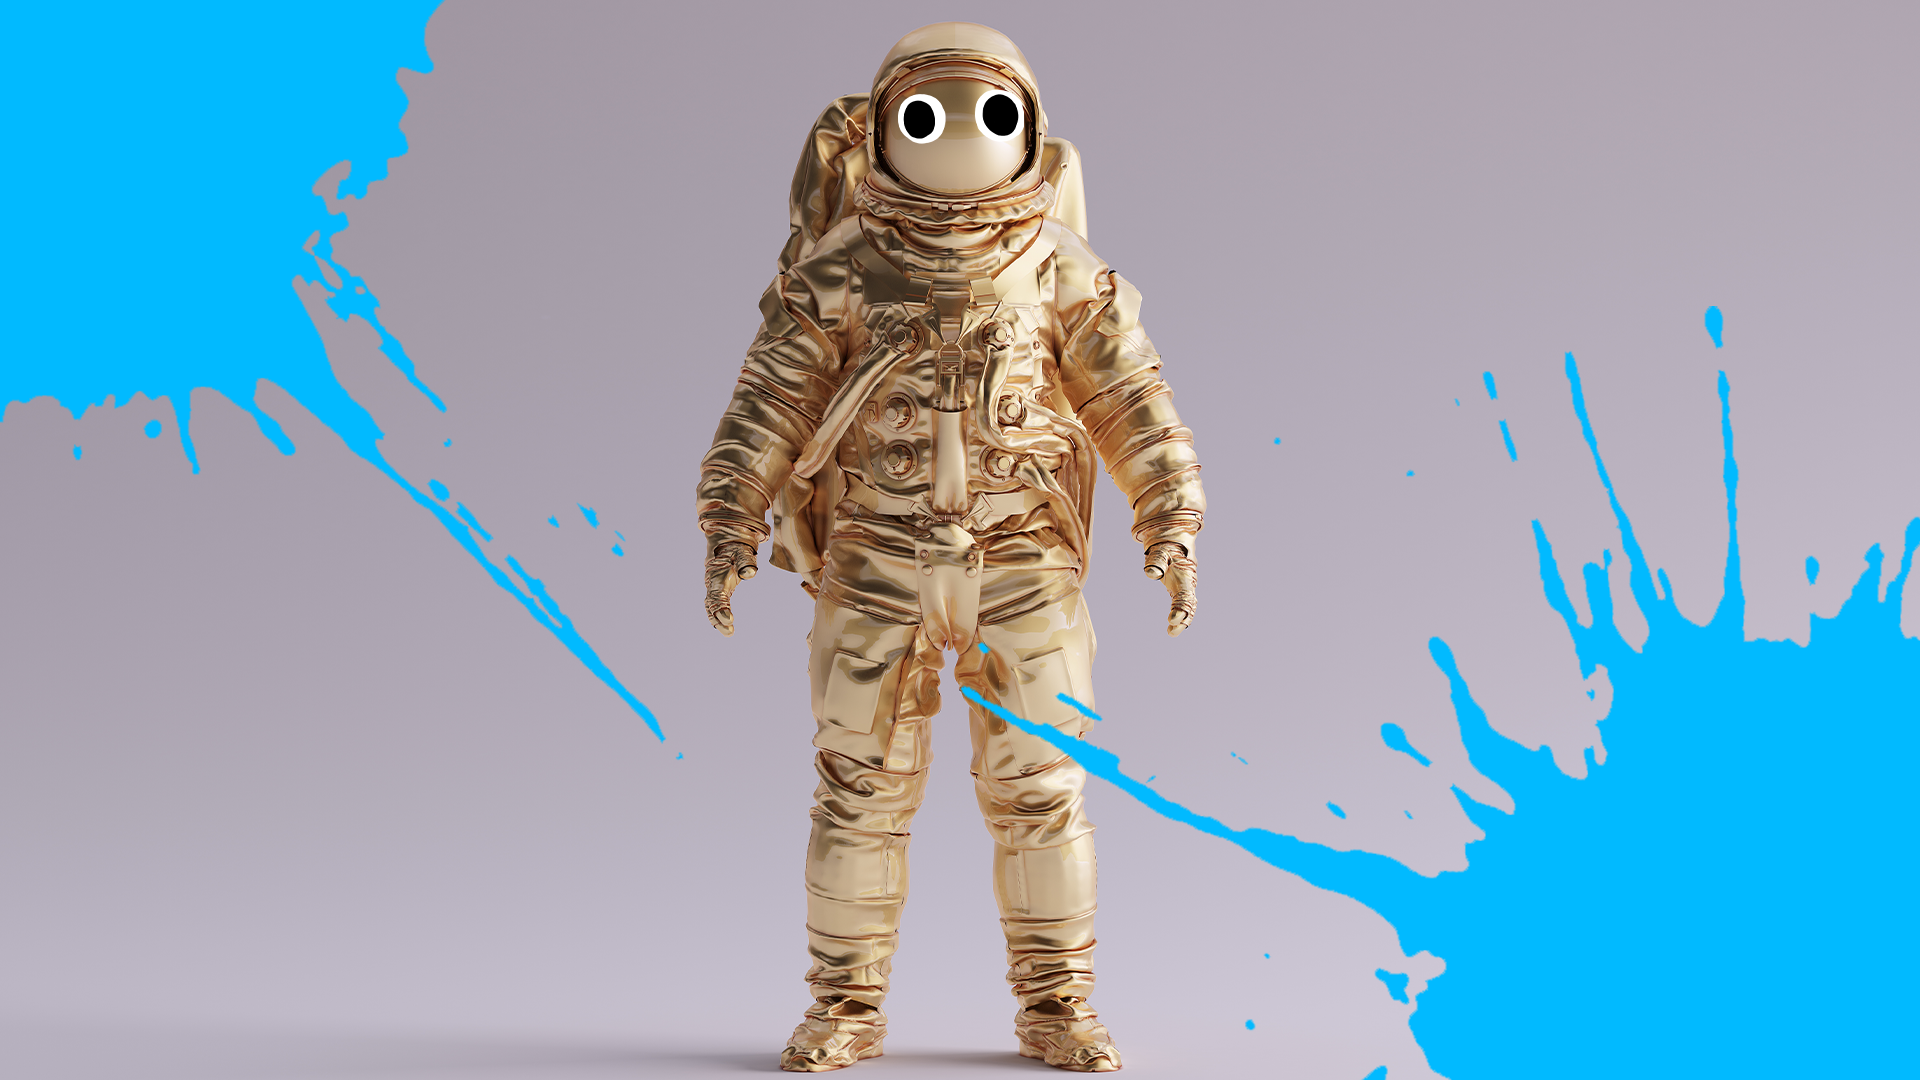 Astronaut statue on grey background with blue splats 